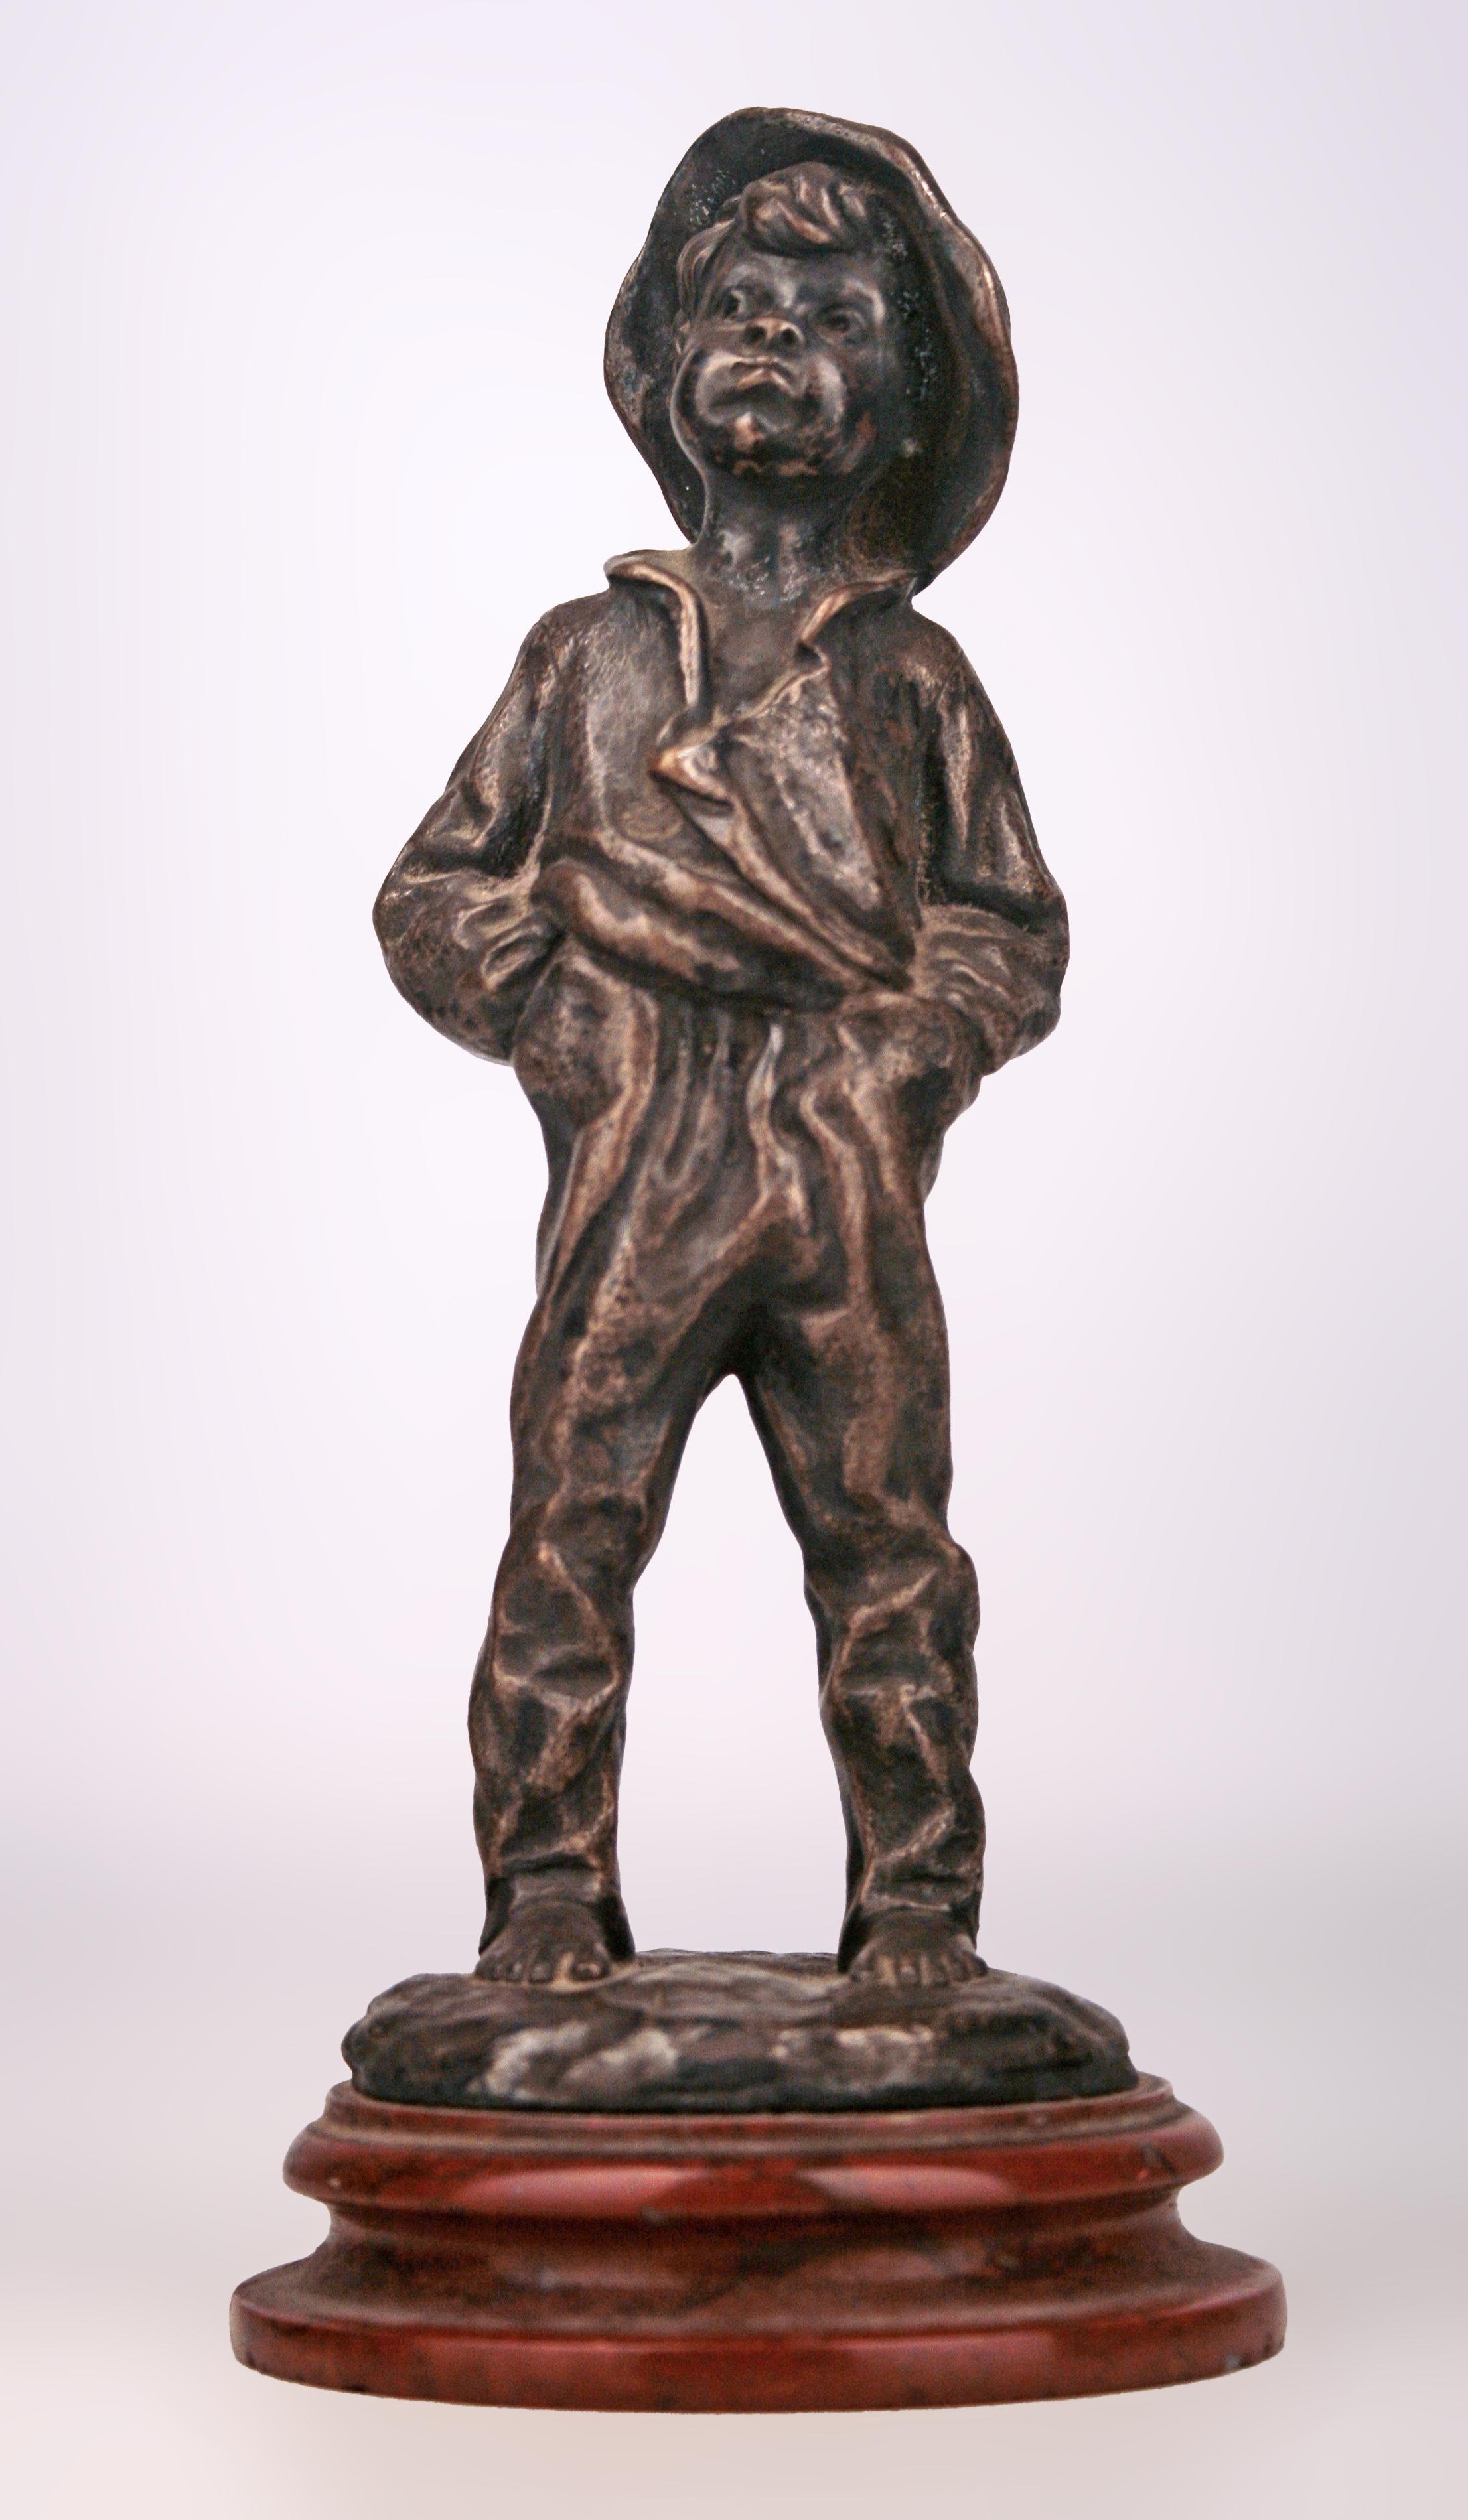 Belle Époque french bronze sculpture of a boy with overall and a hat by Louis Kley

By: Louis Kley
Material: bronze, copper, metal
Technique: cast, patinated, molded, metalwork
Dimensions: 4 in x 8 in
Date: late 19th century
Style: Belle